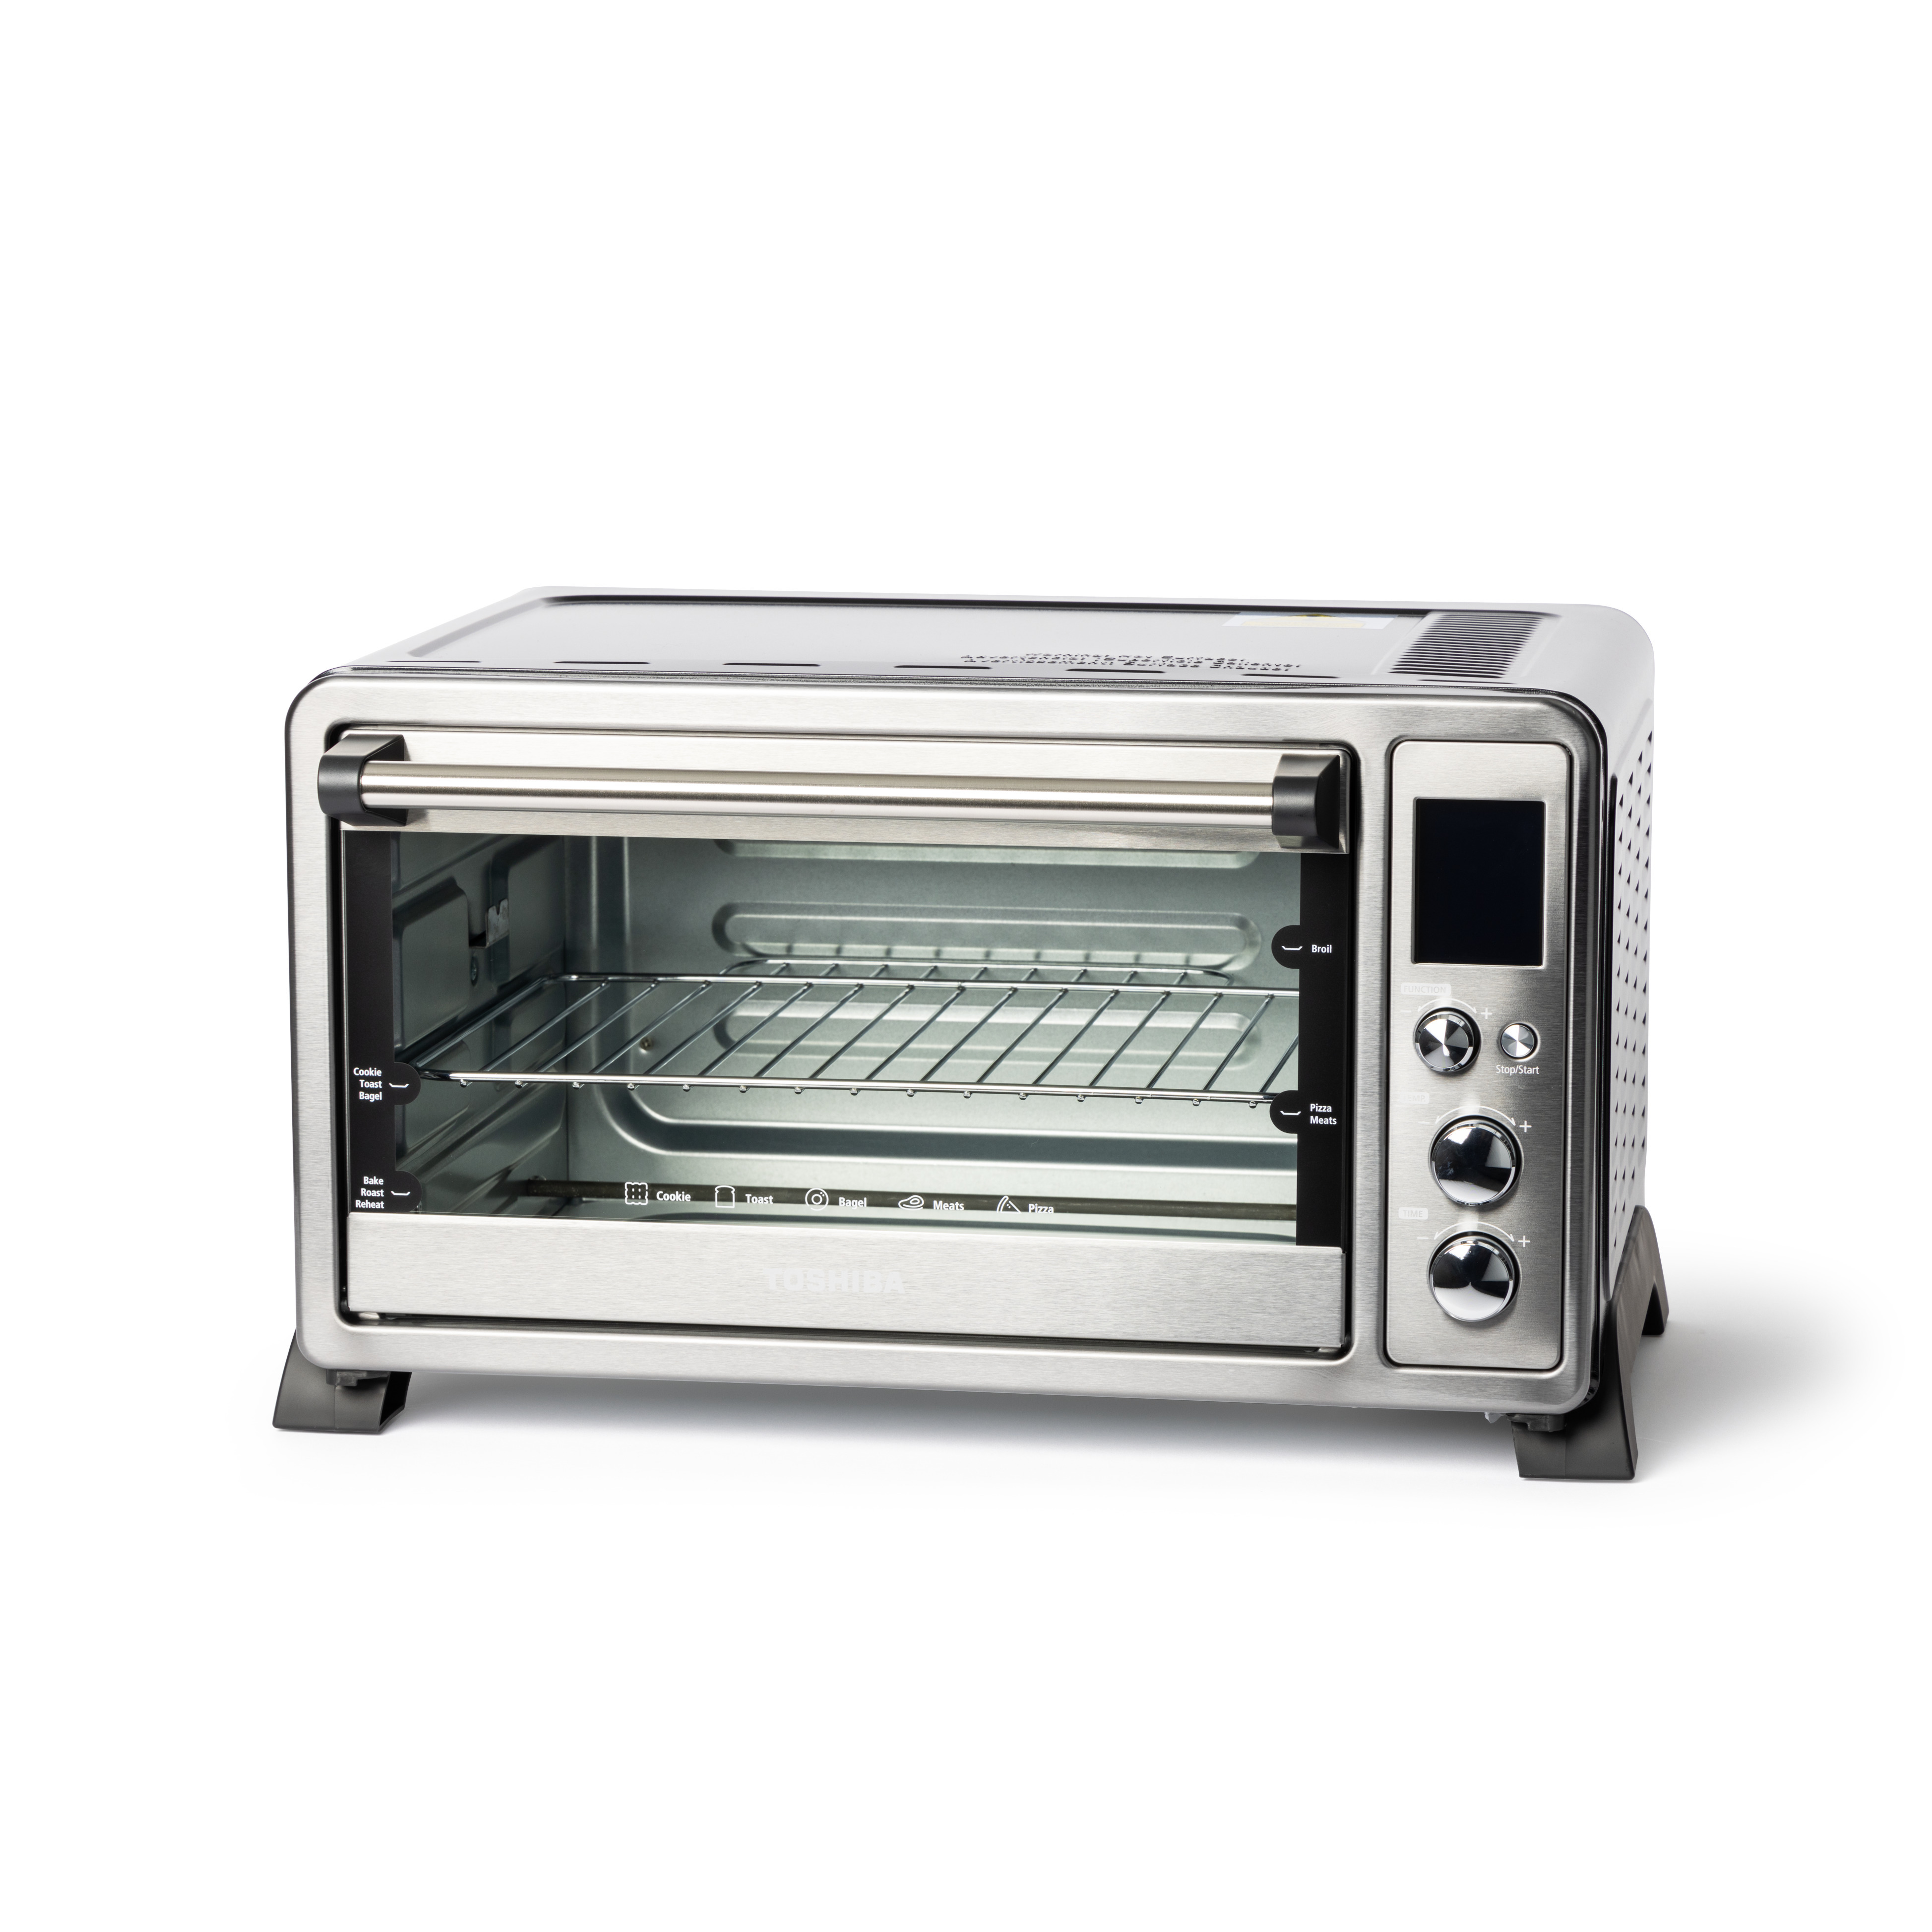 SAVE BIG on GE Calrod Convection Toaster Oven GE Appliances PR Online  Store. The most effective products are available at the lowest prices and  with outstanding service